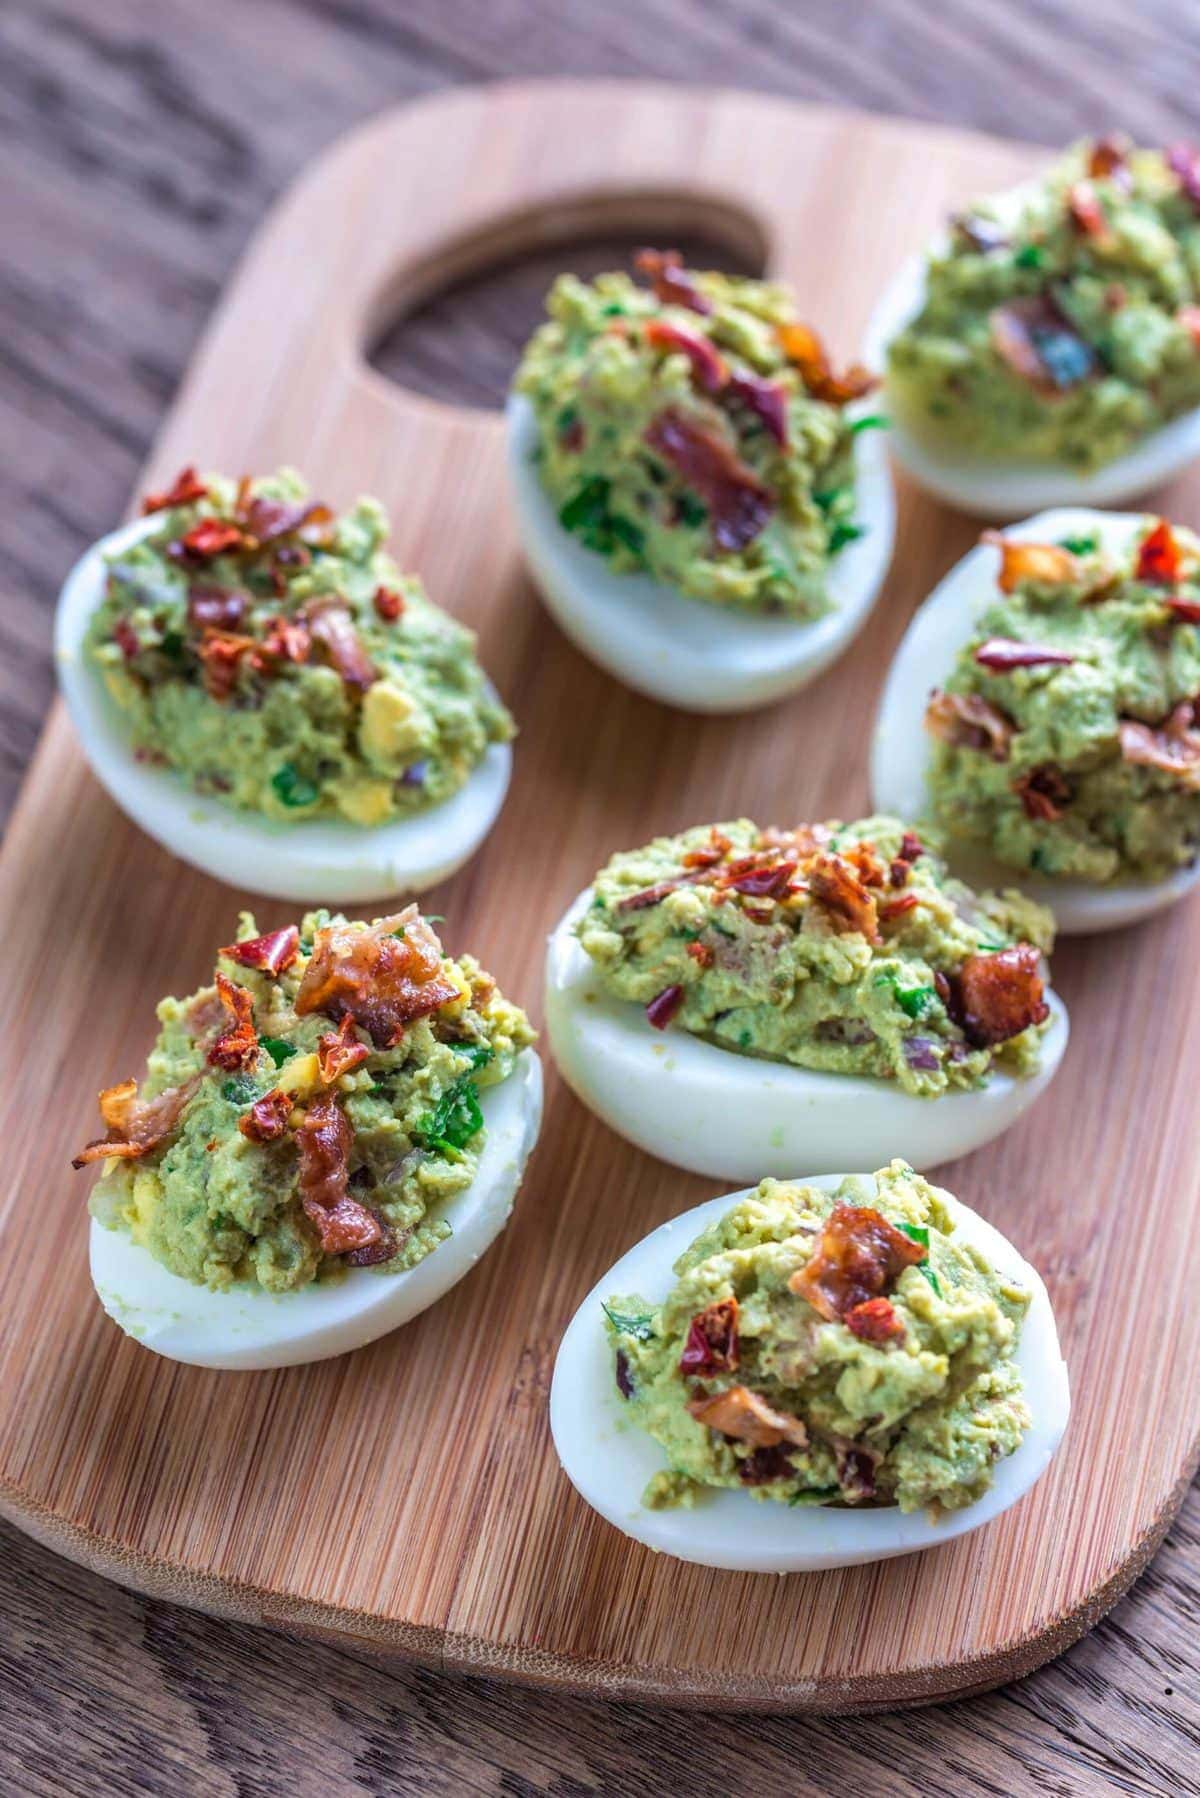 deviled eggs made with guacamole and bacon, served on a wooden tray